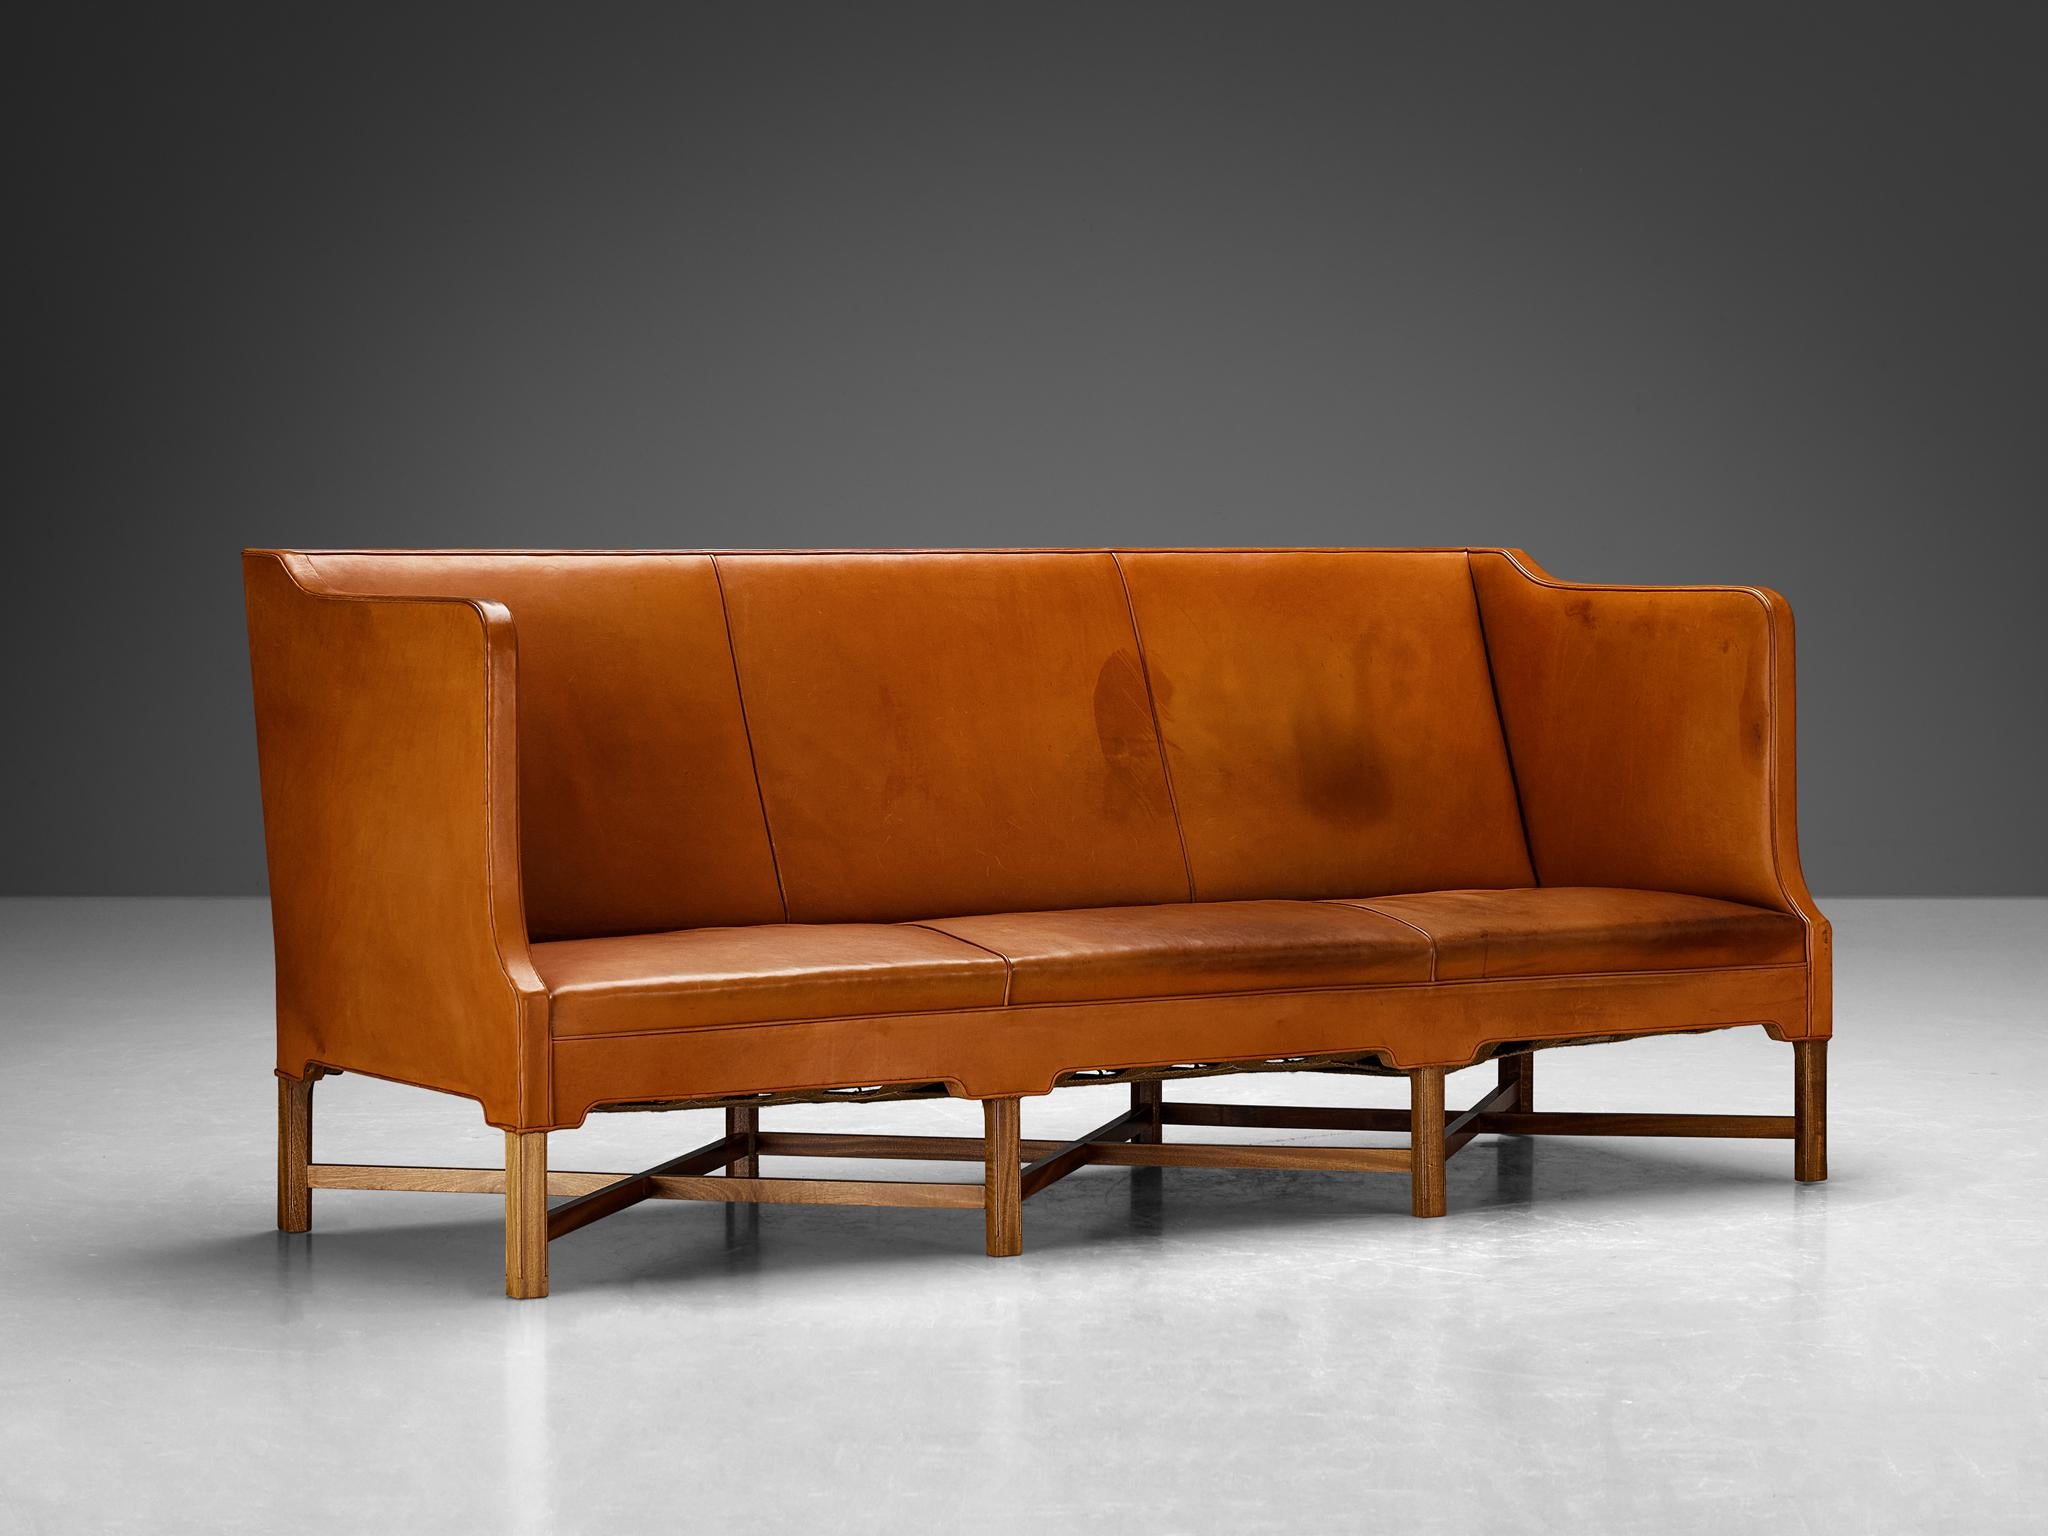 Kaare Klint for Rud.Rasmussen, sofa, model '4118', leather, mahogany, Denmark, design 1930, production 1981

Kaare Klint originally designed the present three-seat sofa, known as 4118, for the office of the Prime Minister Throvald Stauning